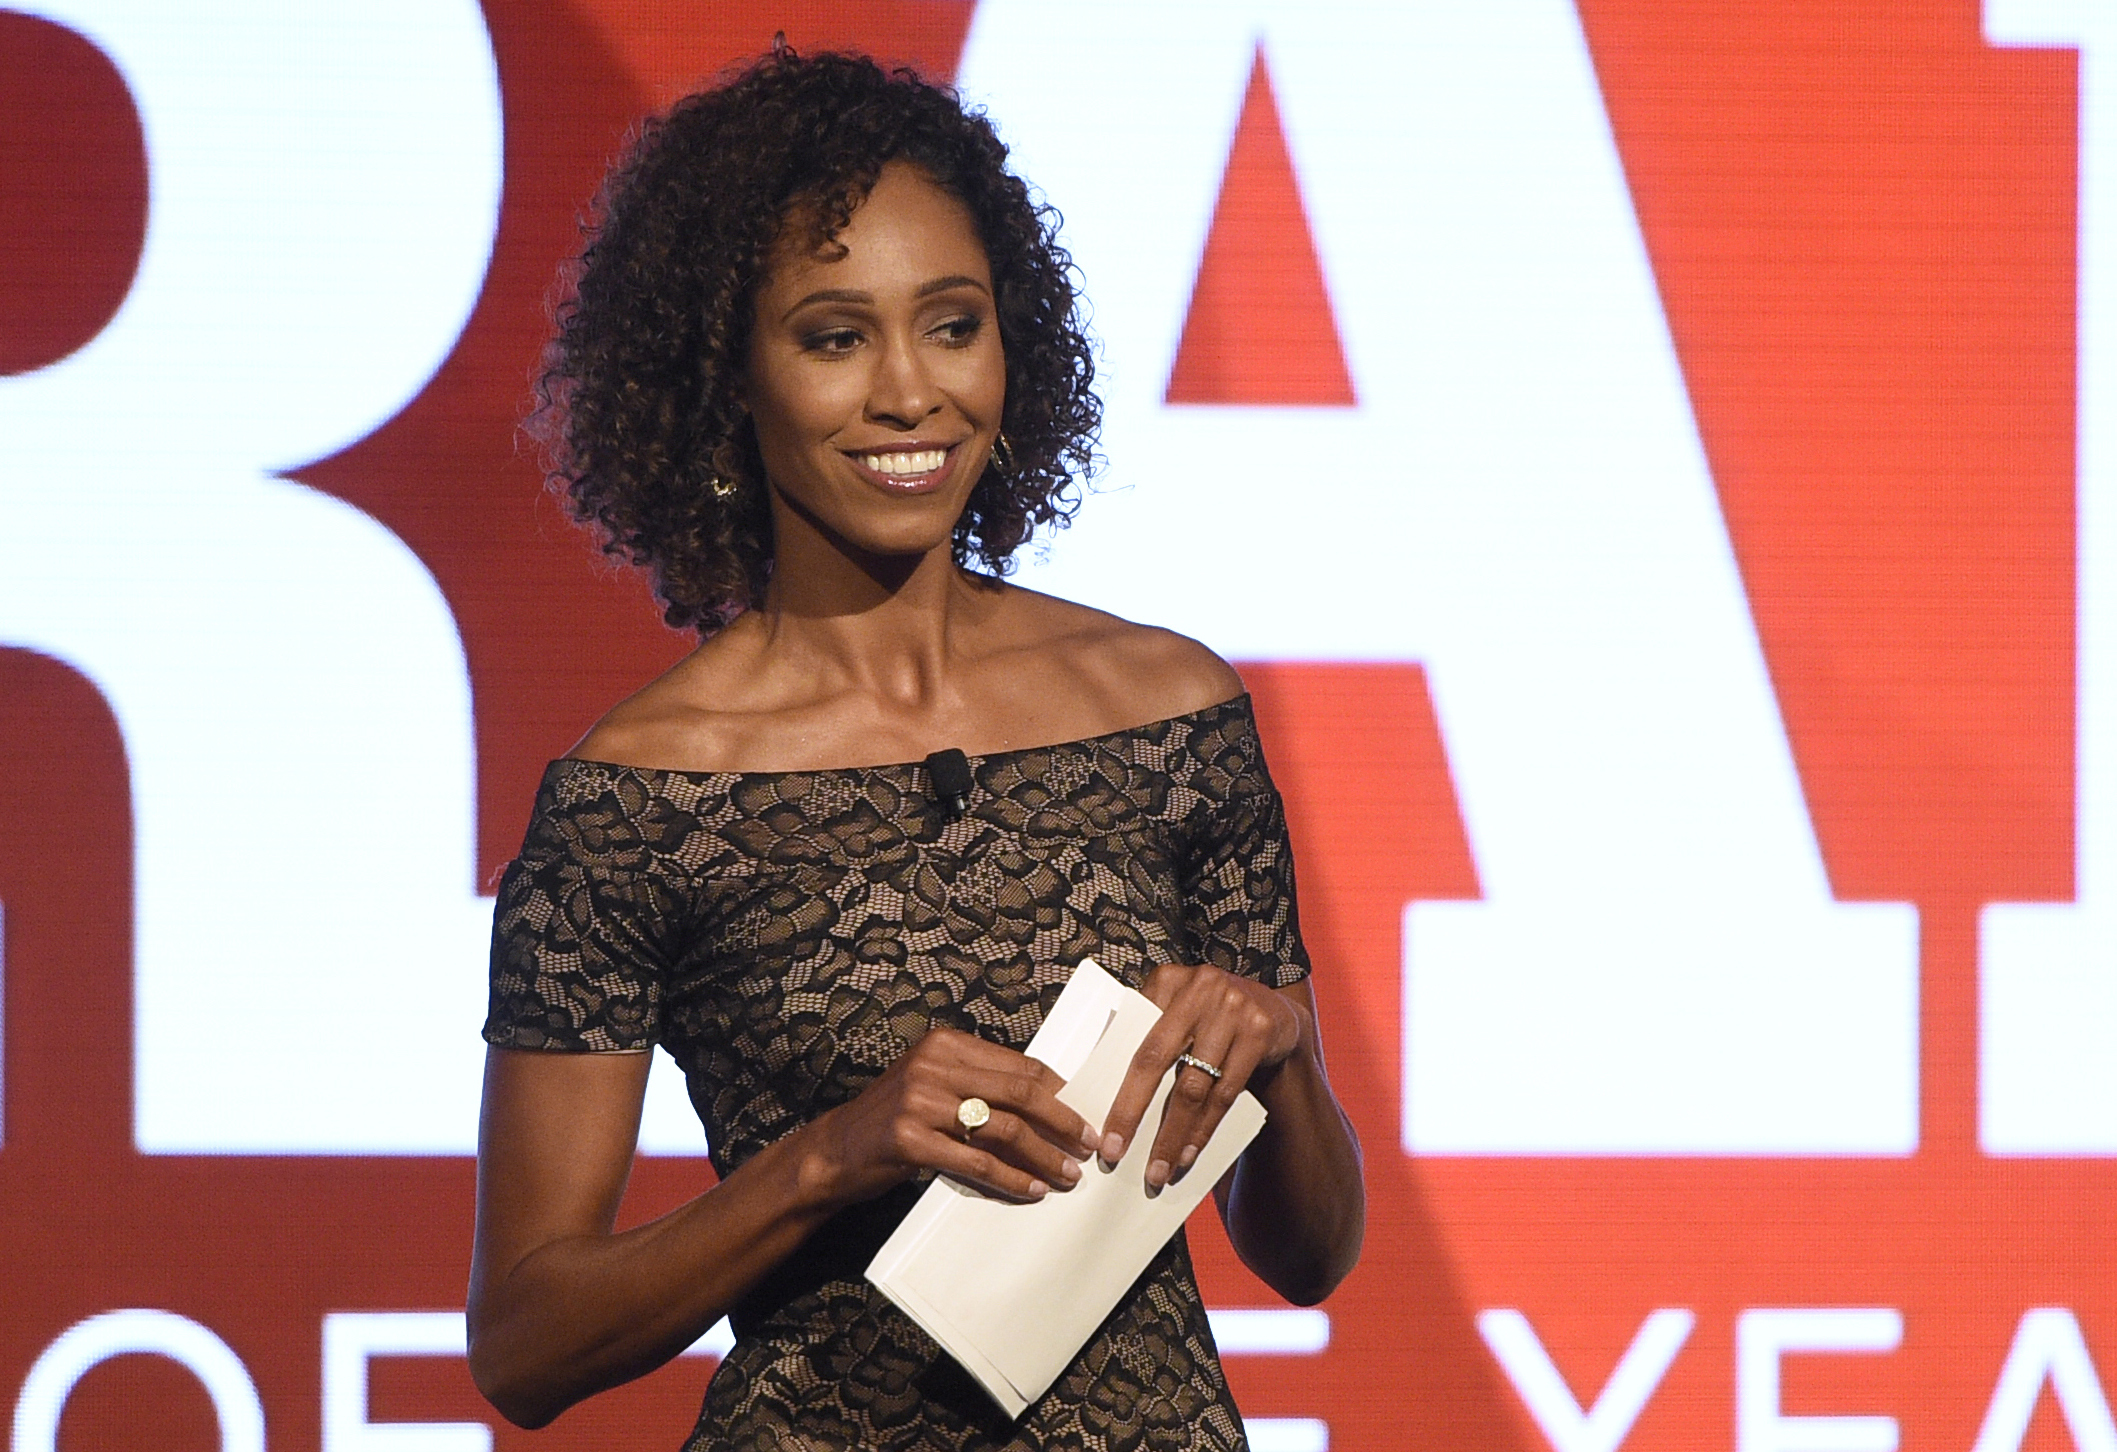 ESPN anchor Sage Steele turned down a $501,000 settlement offer, standing firmly on her opinion that her right to free speech was violated by the network.